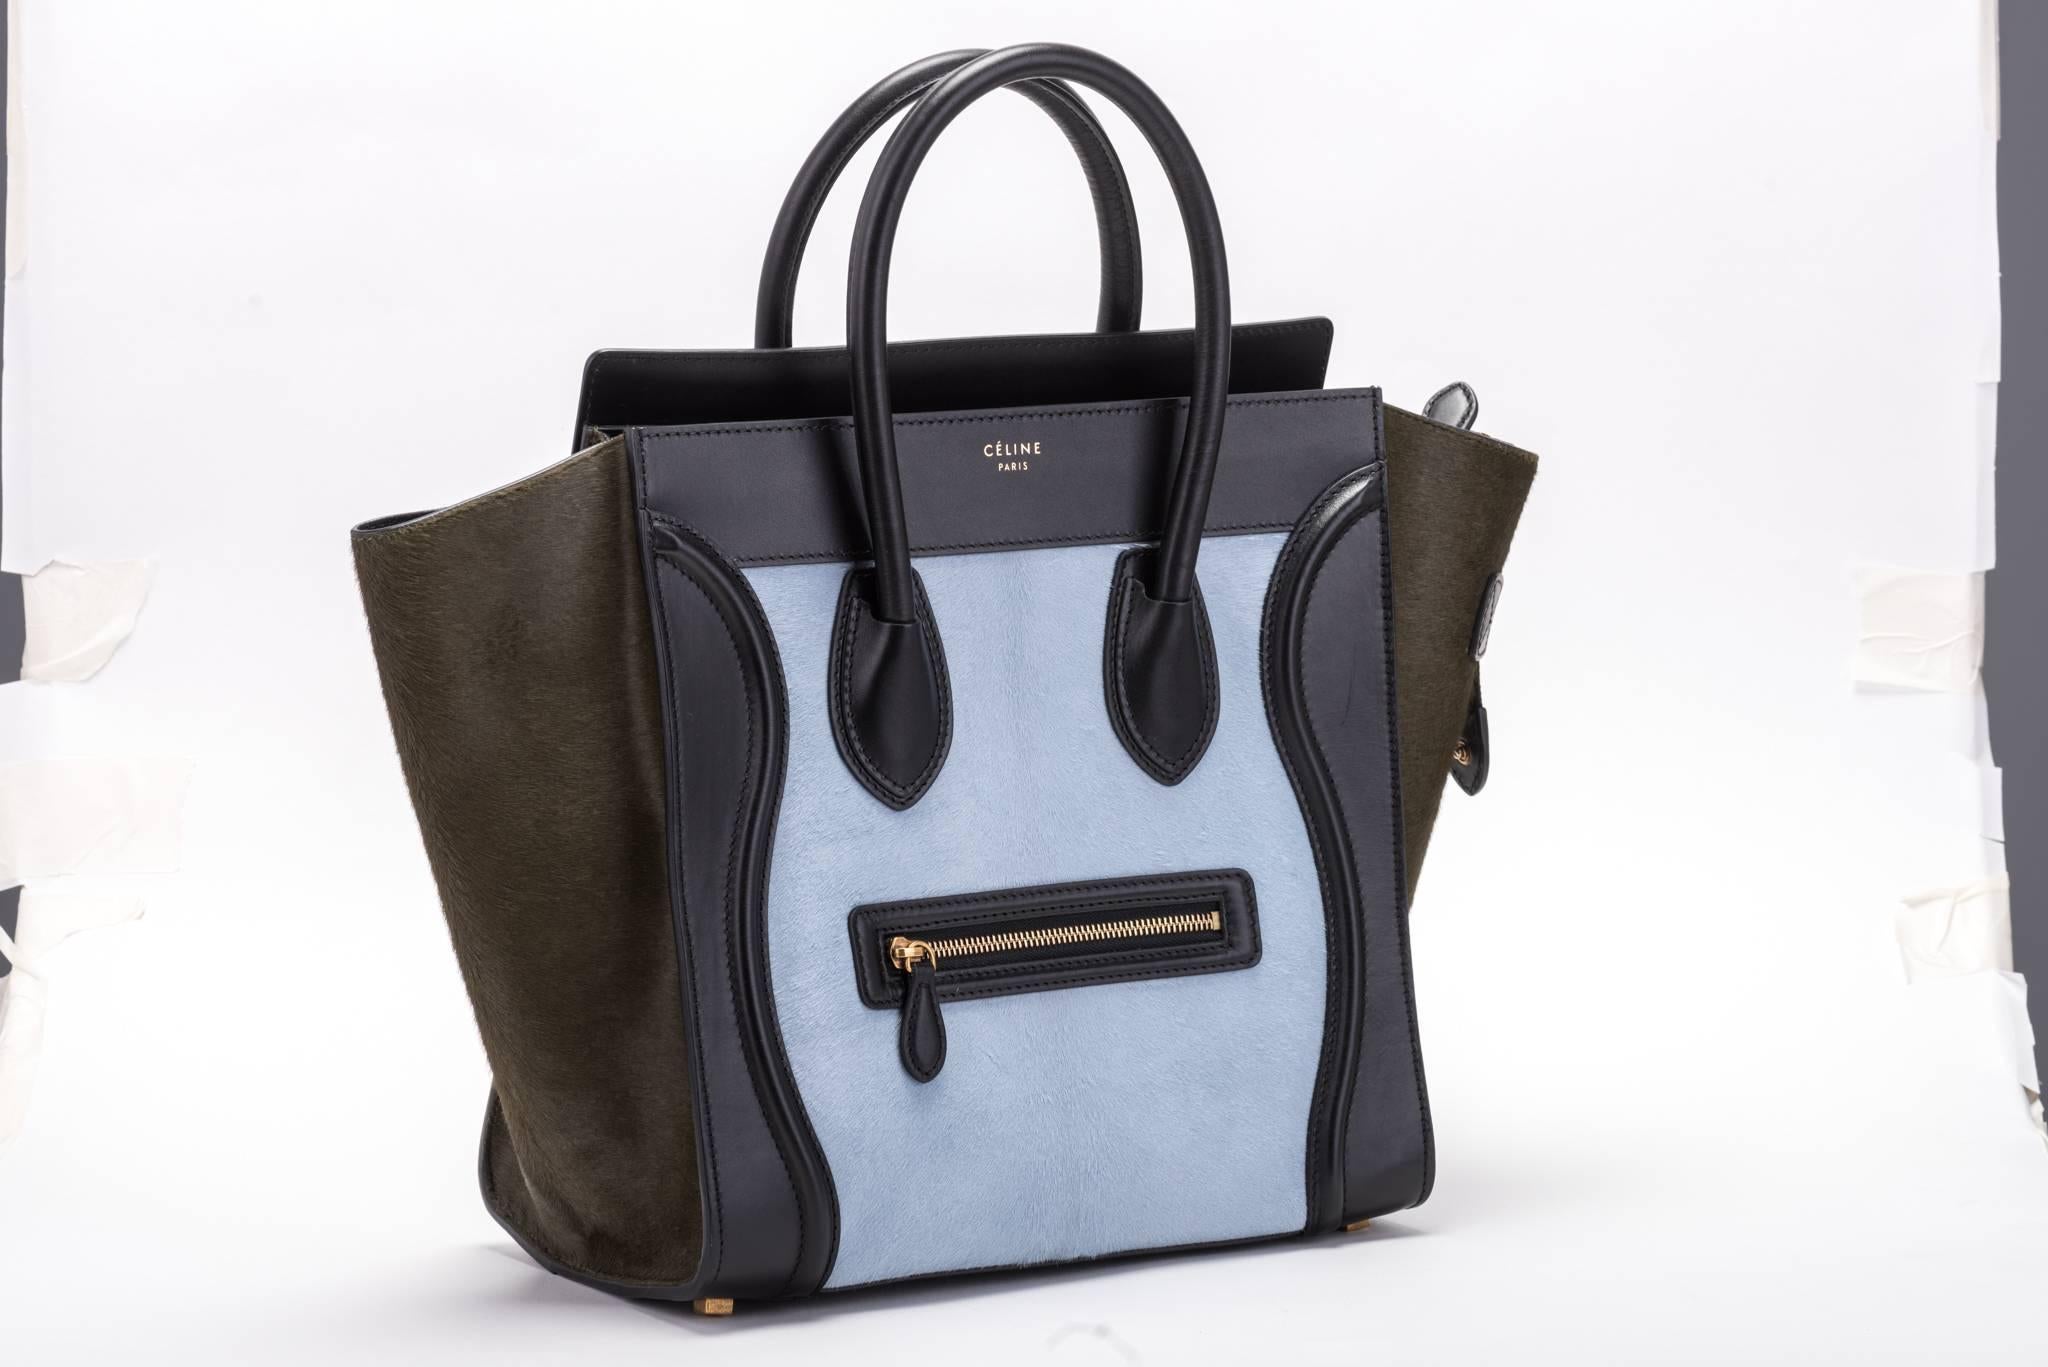 Celine tricolor mini luggage in black calfskin leather and pony hair.  Hand carry with 5